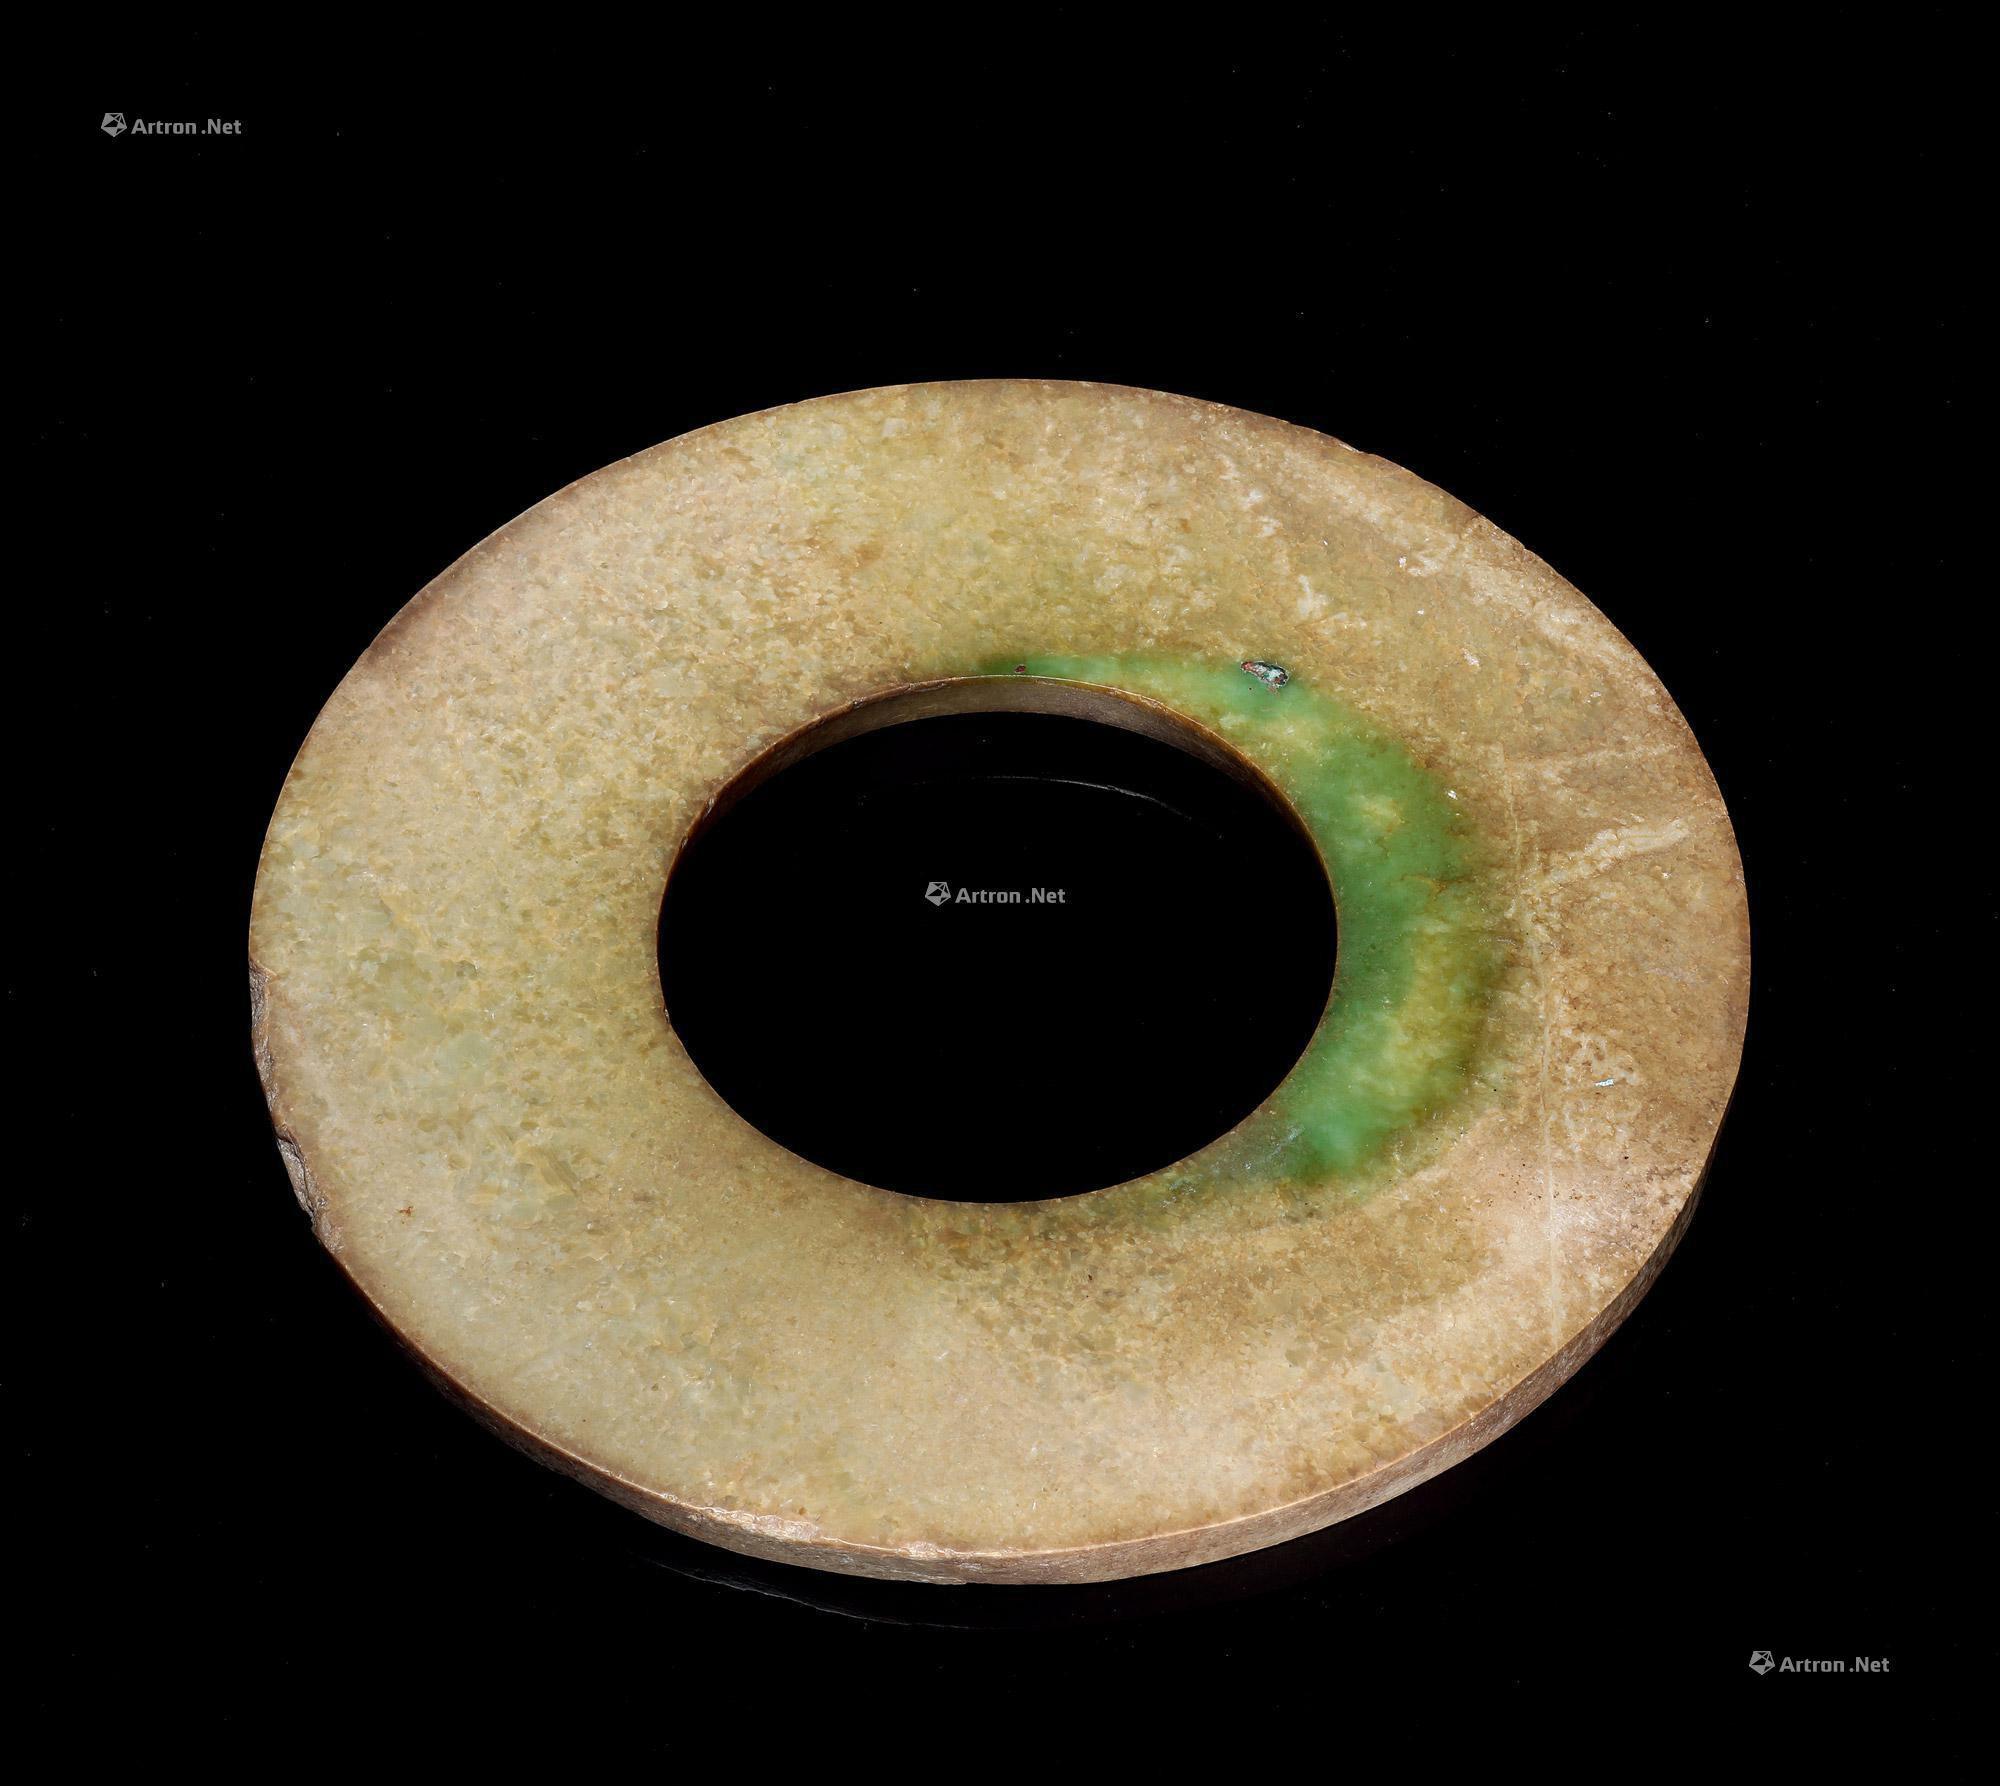 A JADE DISC， BI， FROM THE COLLECTION OF GONG XINZHAO